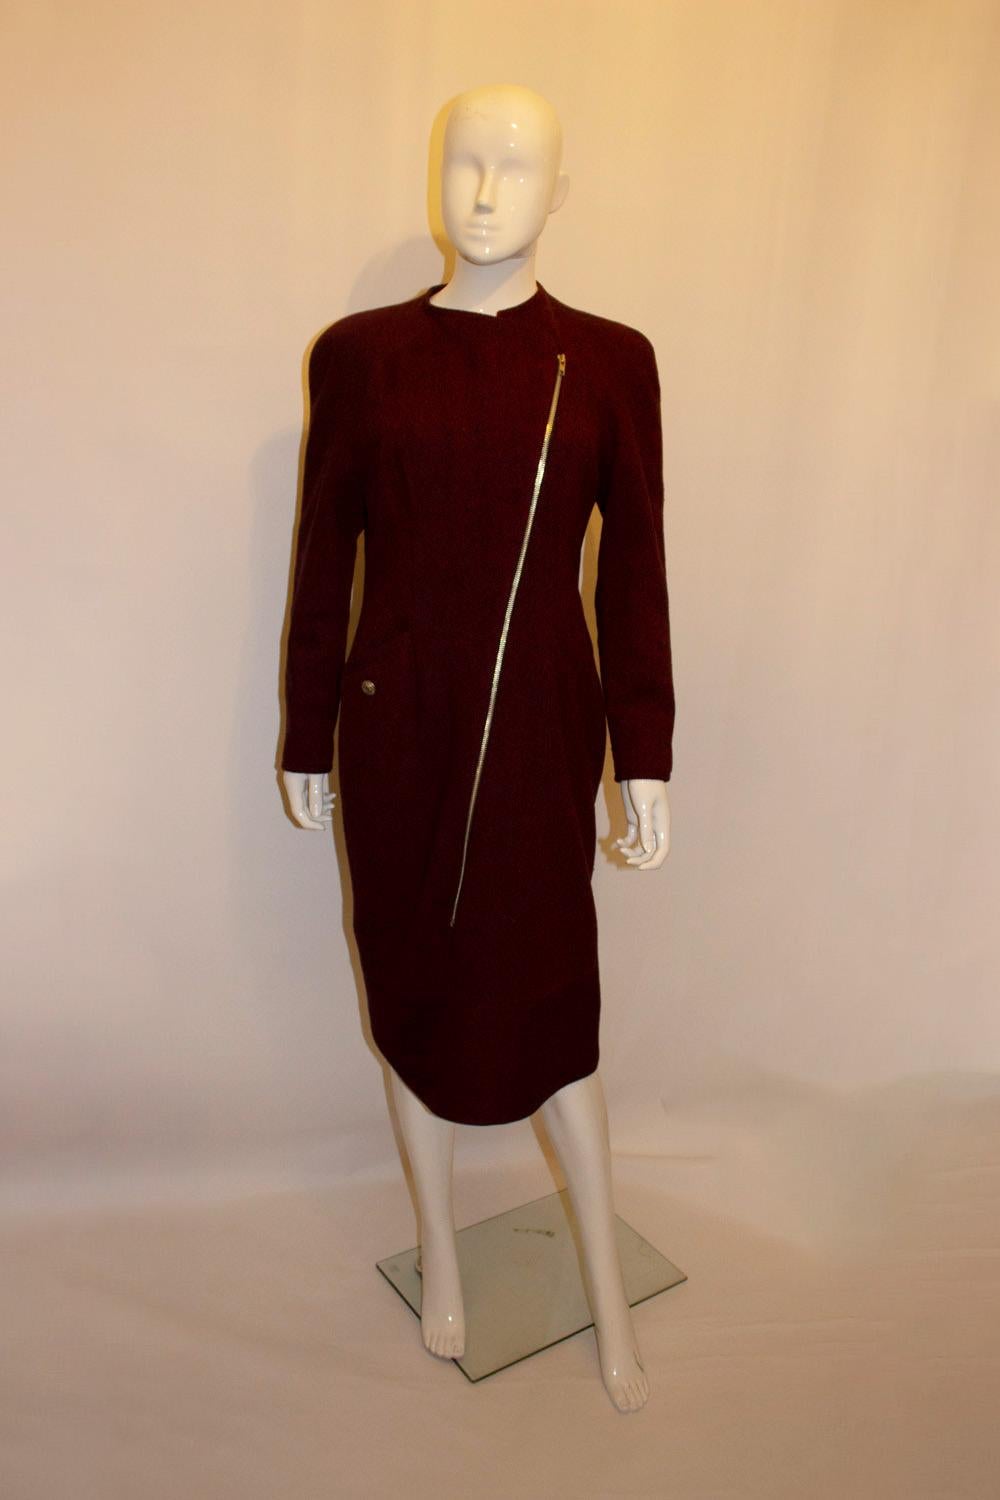 Vtntage Pallant London Red and Black Wool Coat Dress For Sale 2